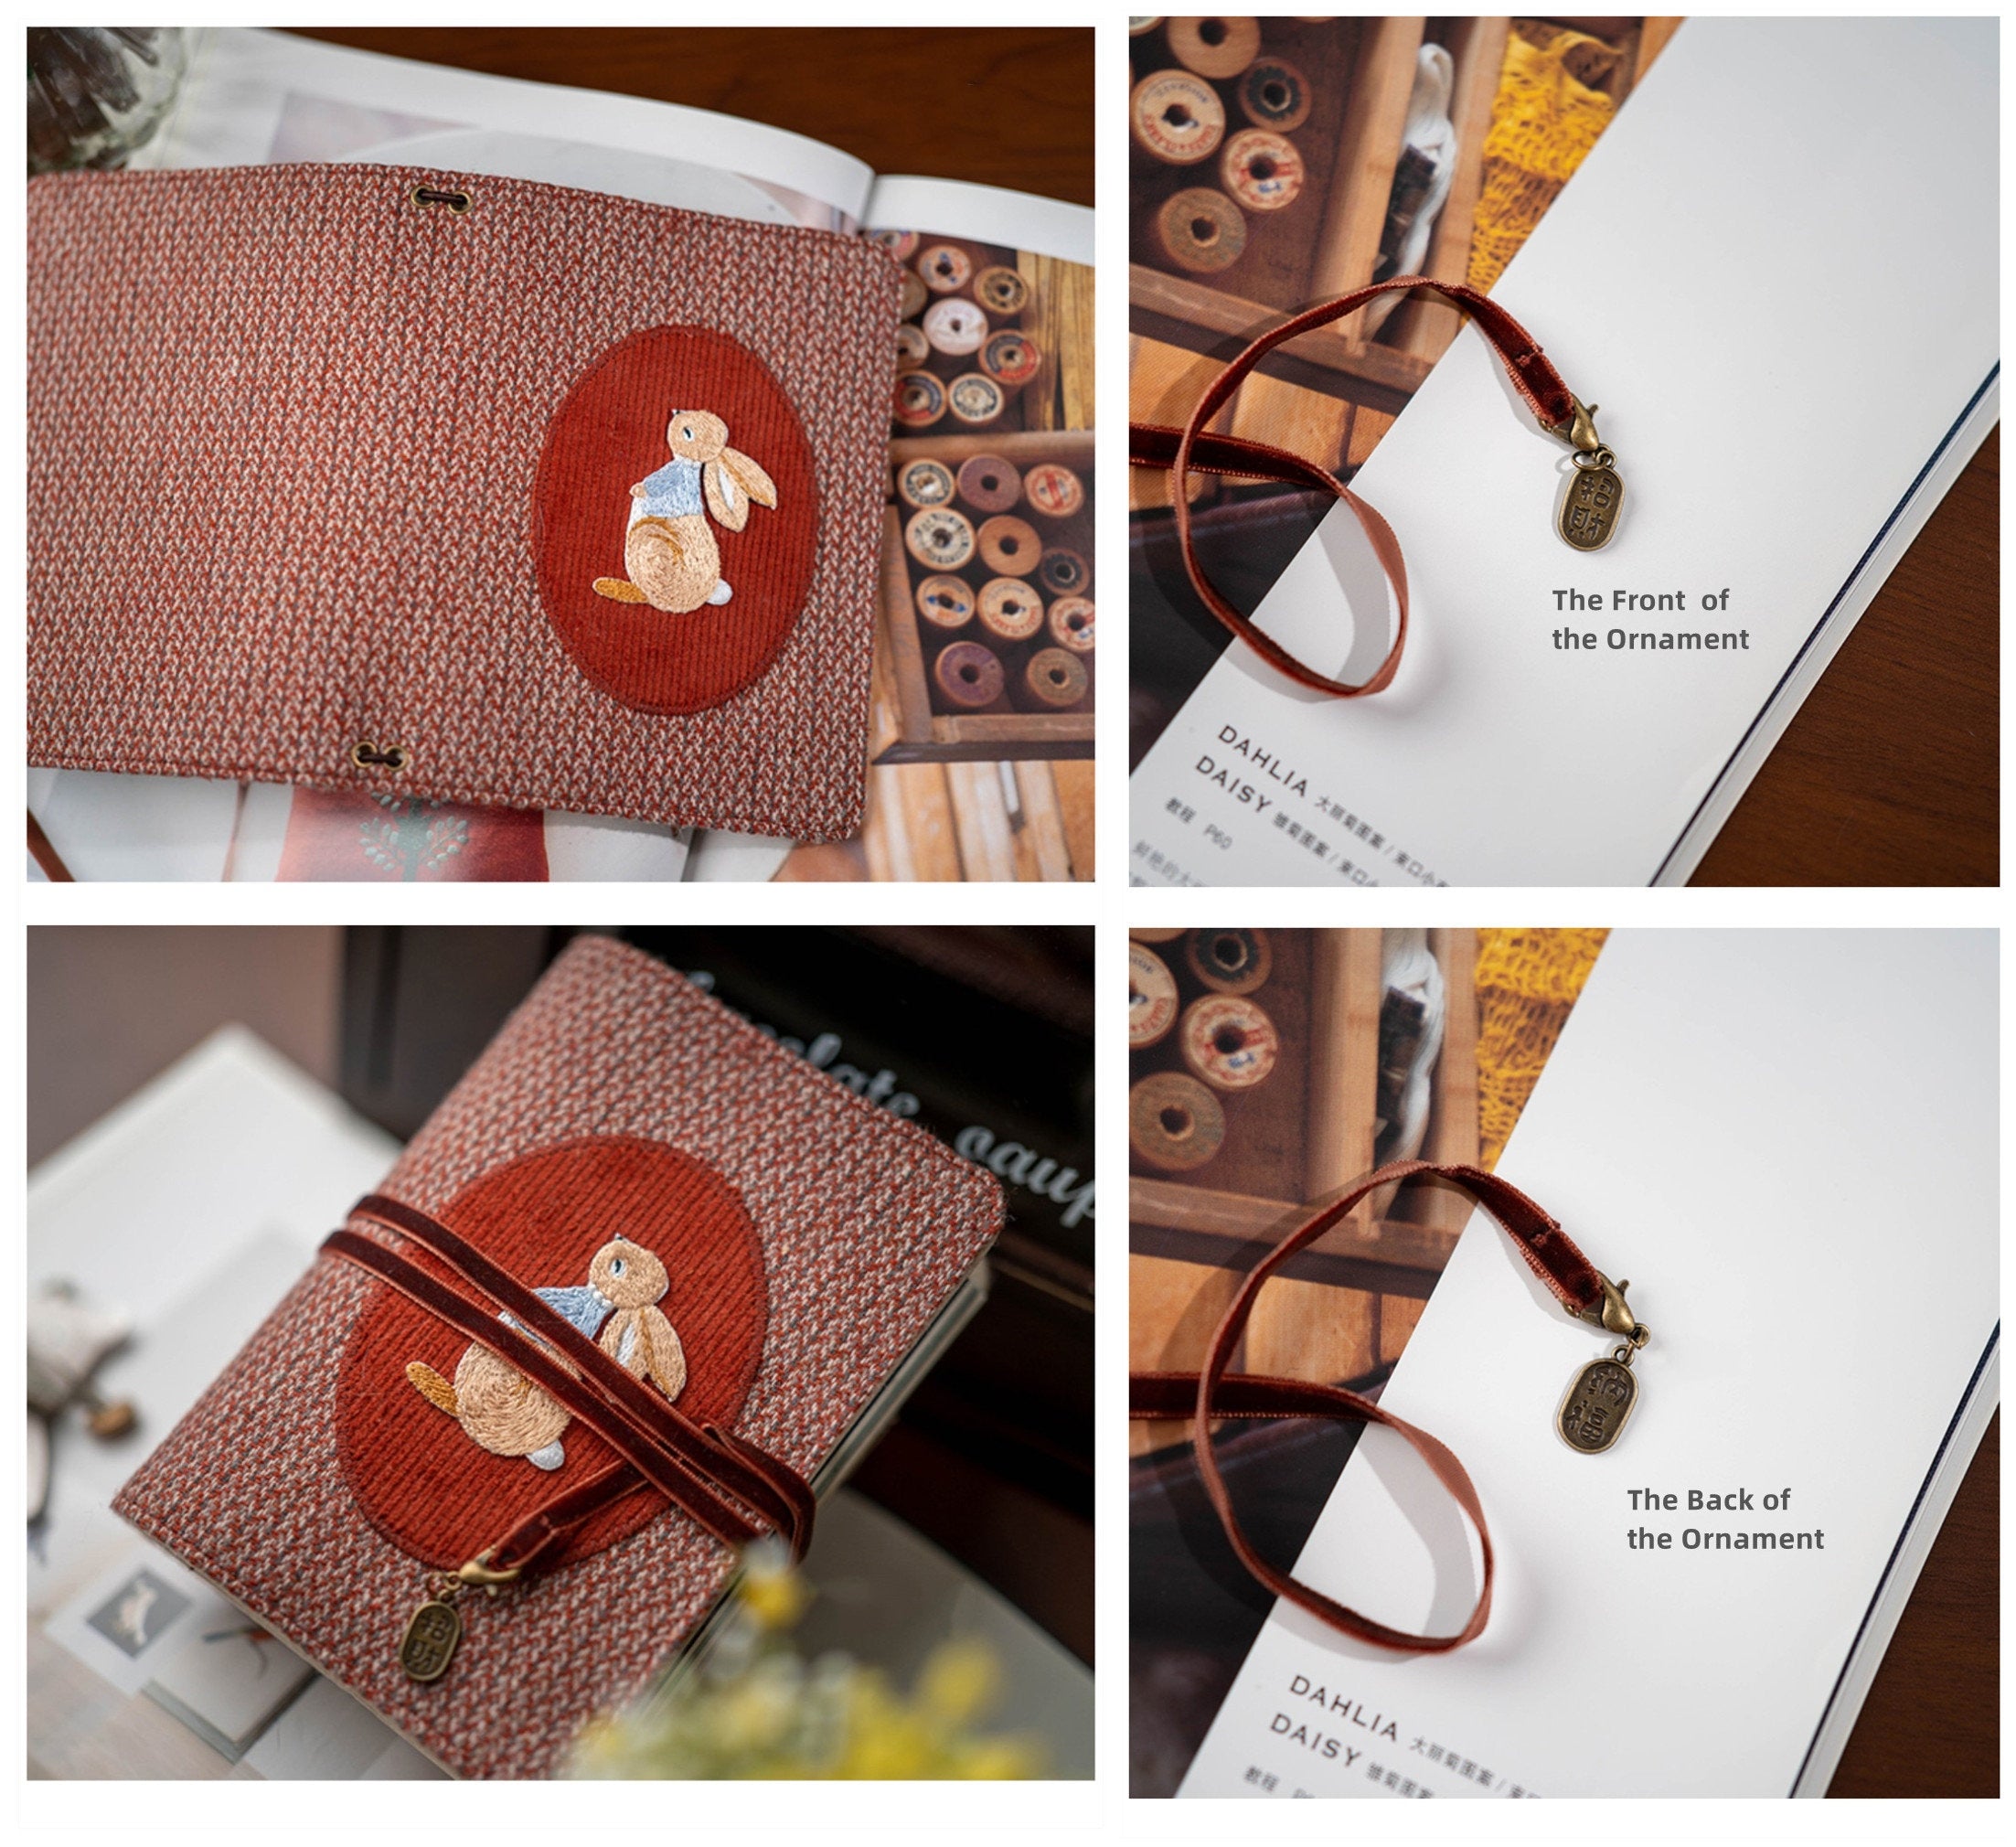 Special Paper Embroidered Rabbit TN Notebook Retro Woolen-covered Tied Rope Journal Multifunctional Collage Book Traveler's Notebook Gift